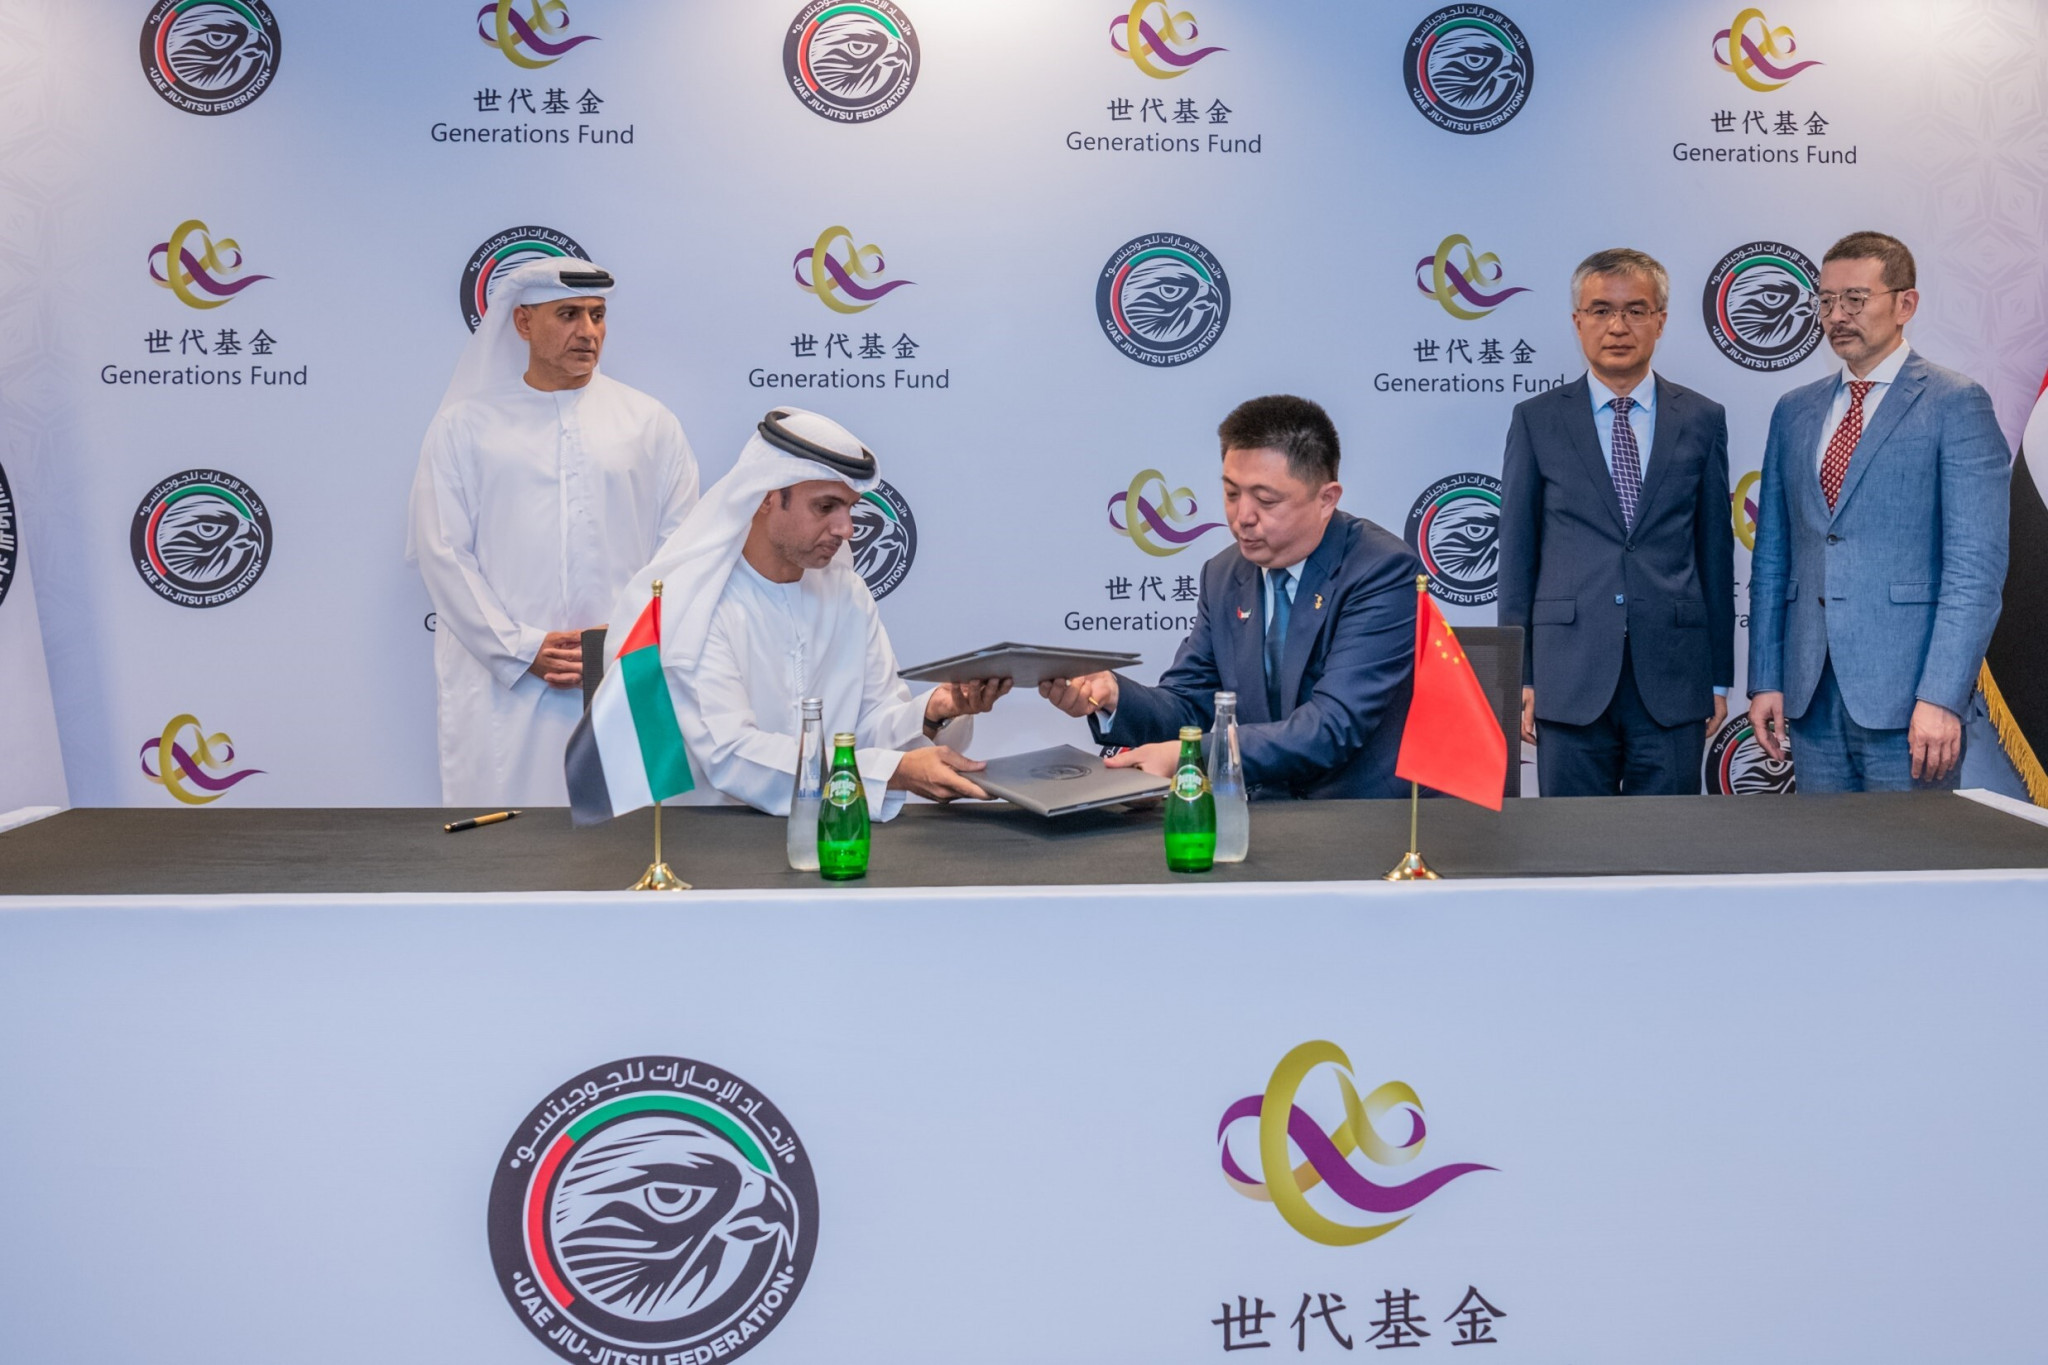 The United Arab Emirates Jiu-Jitsu Federation and China's Generations Fund have signed an agreement to support the Chinese ju-jitsu team at next year’s Hangzhou 2022 Asian Games ©UAEJJF